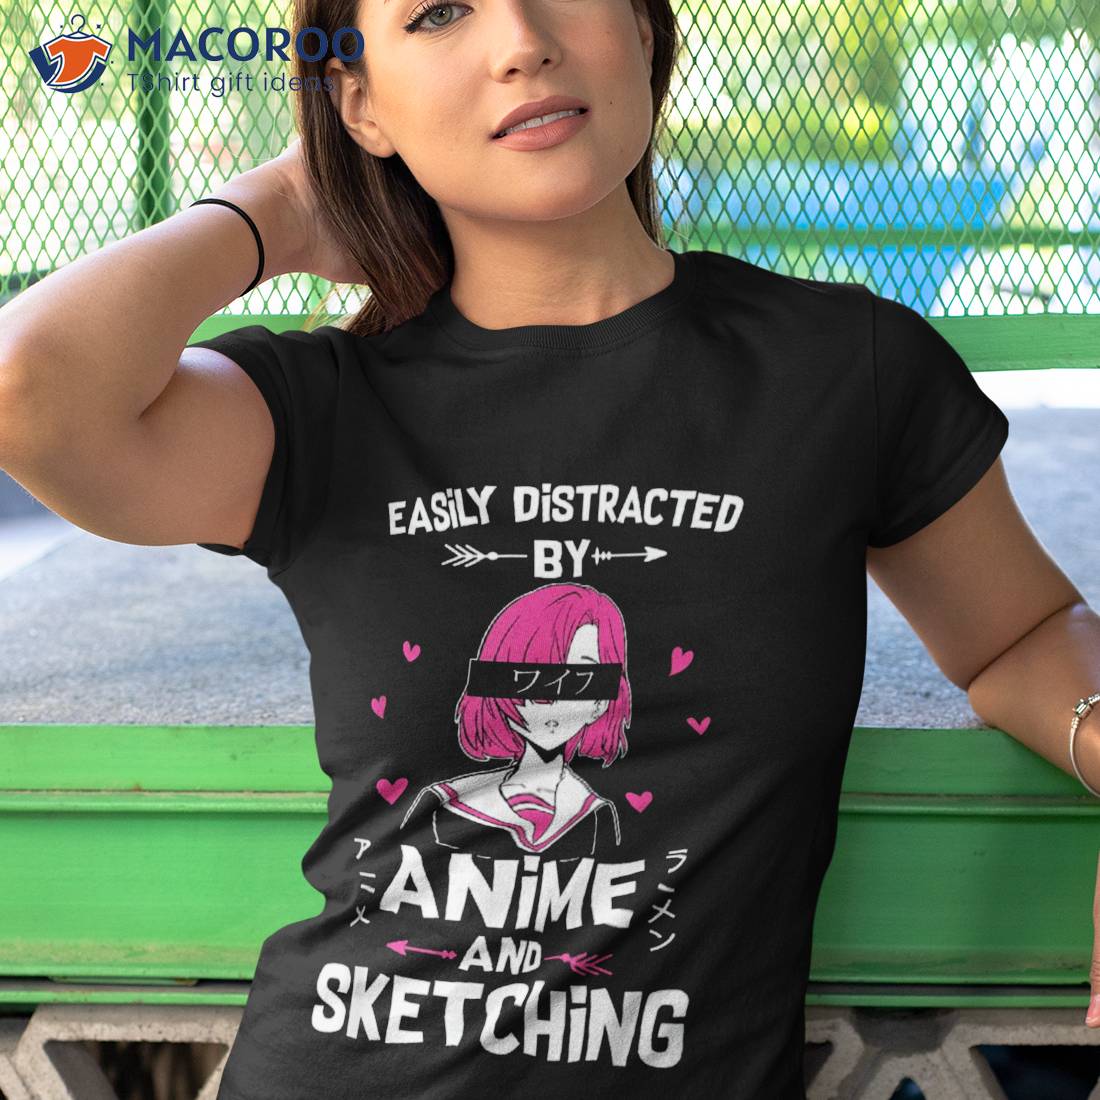 https://images.macoroo.com/wp-content/uploads/2023/05/just-a-girl-who-loves-anime-and-sketching-drawing-art-gifts-shirt-tshirt-1.jpg